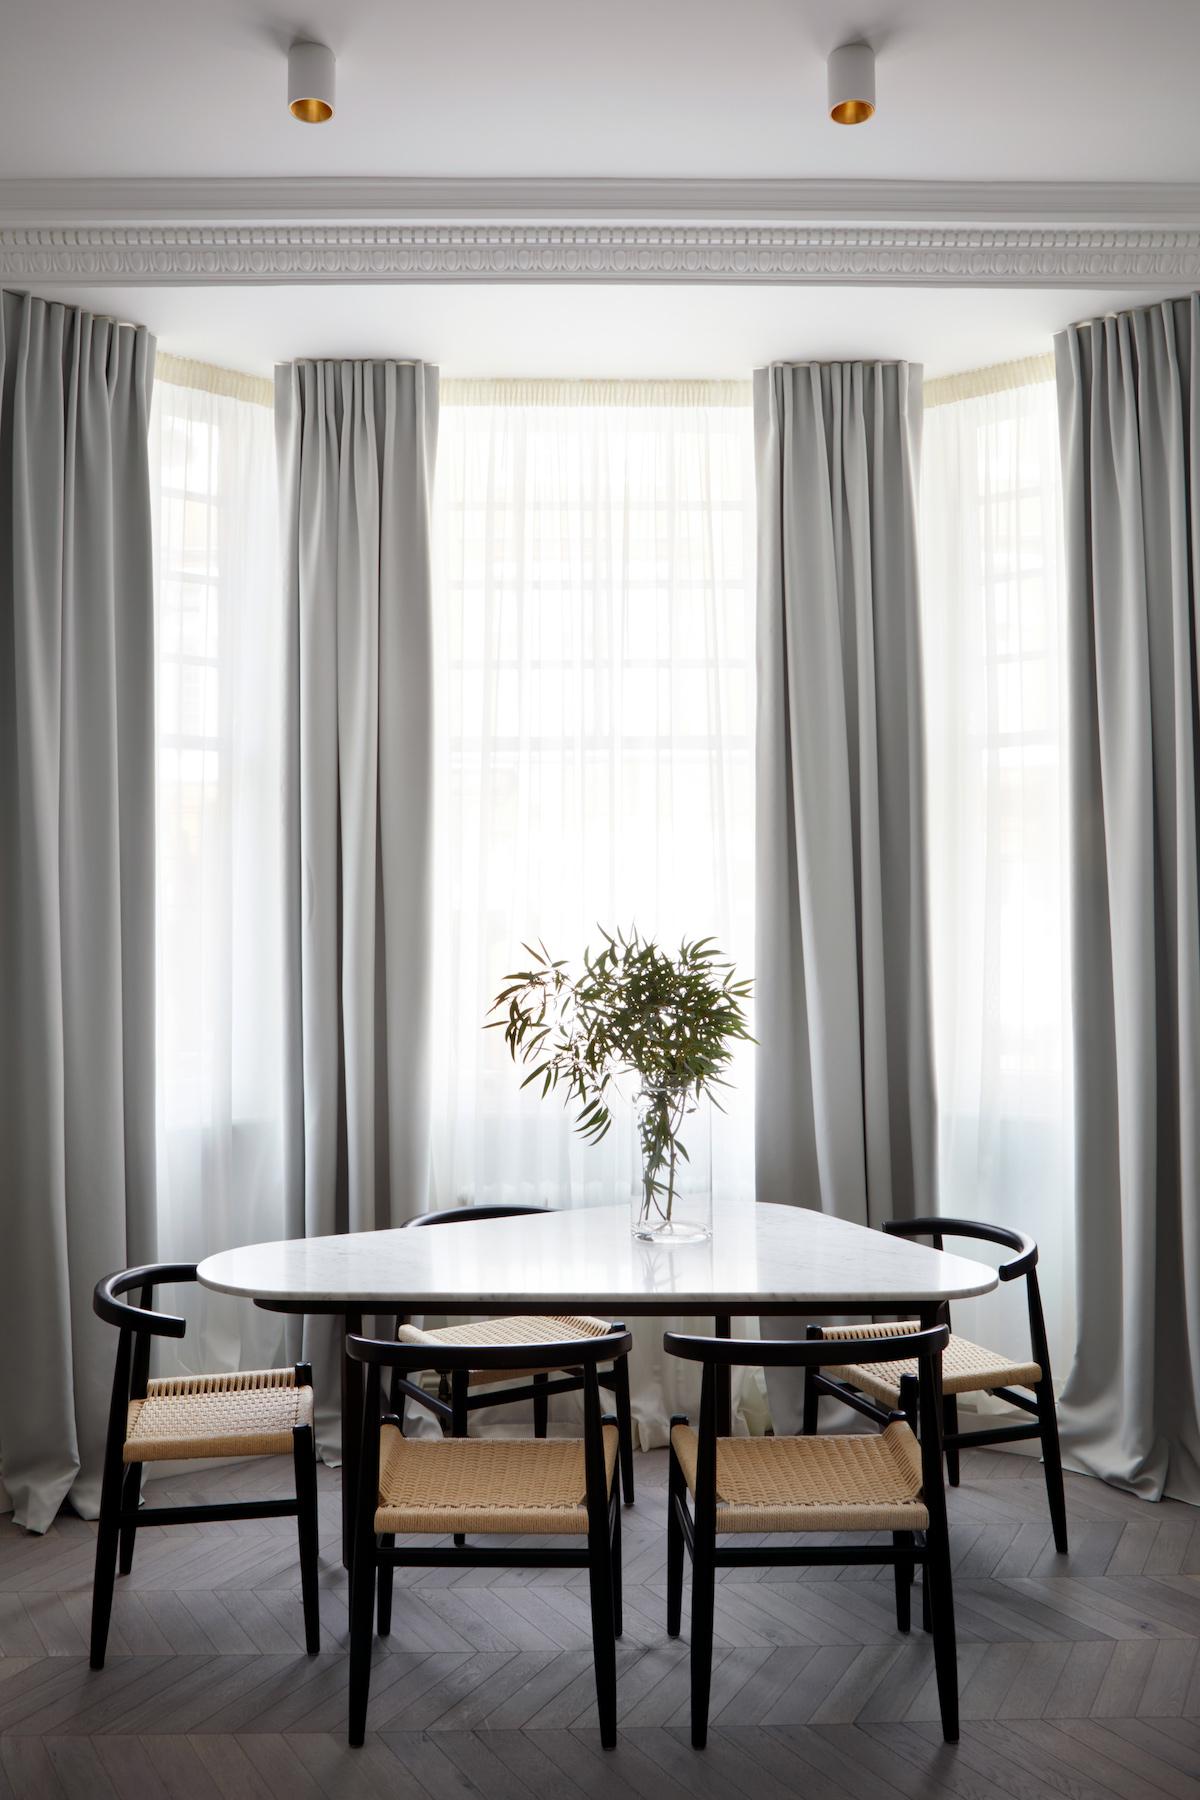 Ethereal Shades Meet Bespoke Details in this Chelsea Apartment